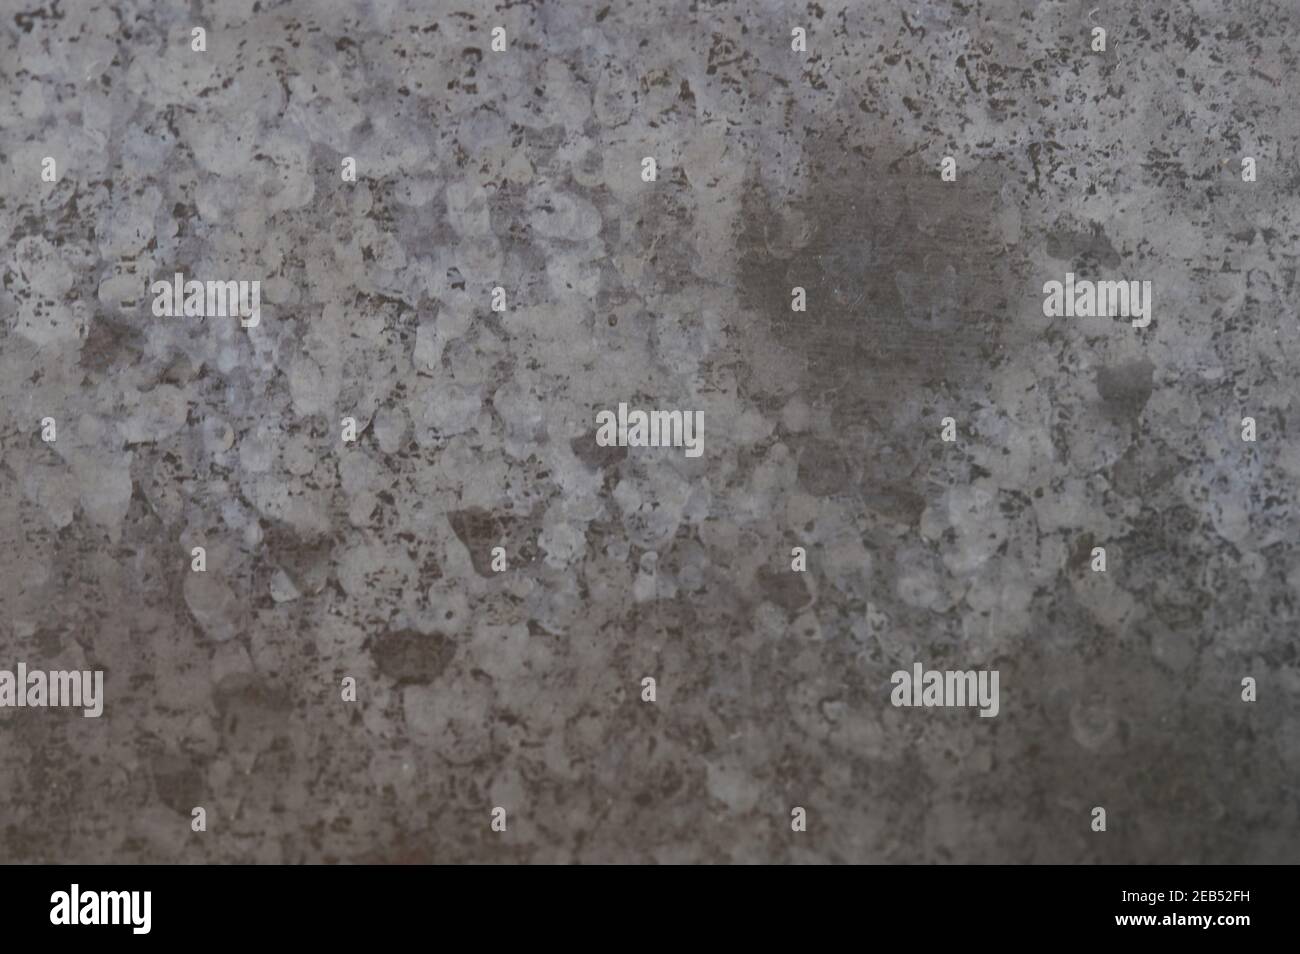 Dirty steel surface after dry water. Rough metal texture Stock Photo